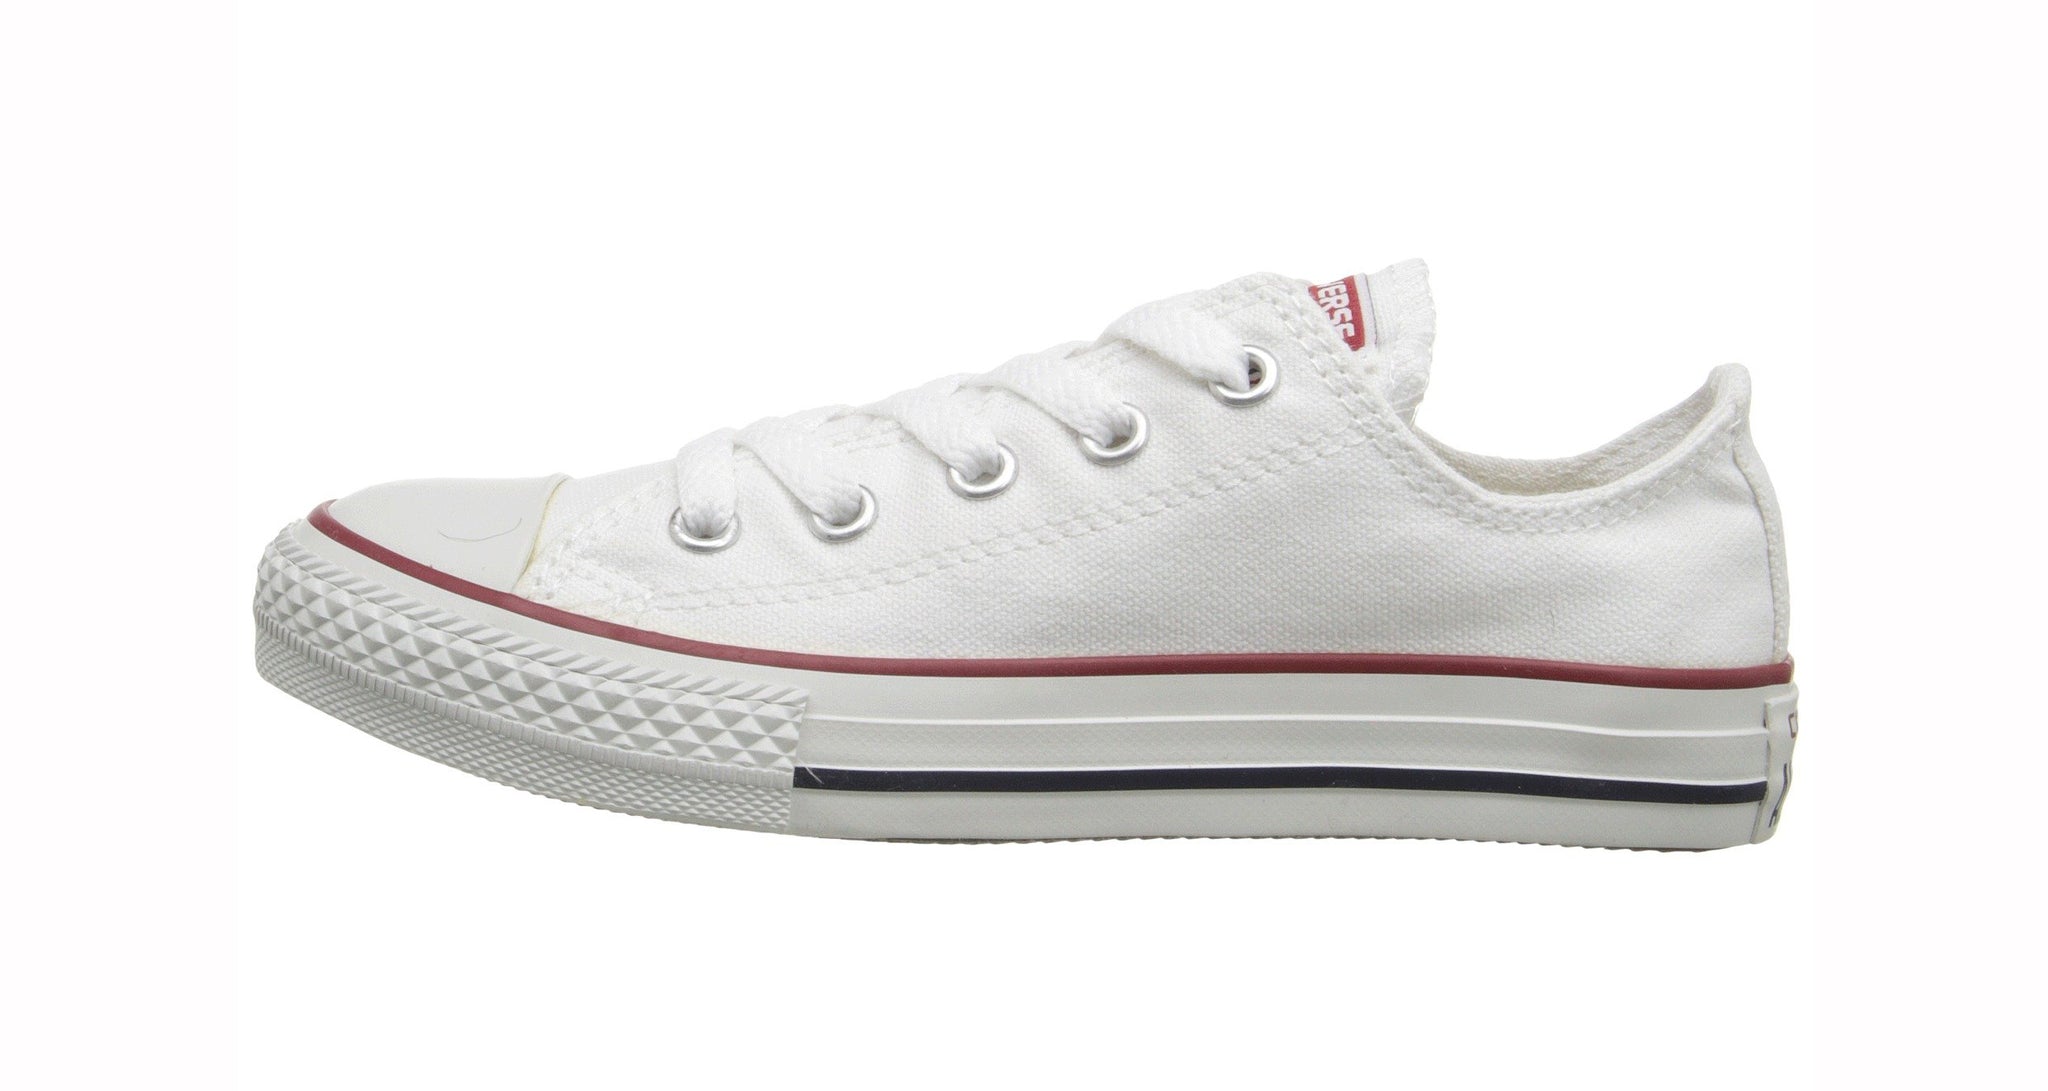 [3J256] Converse All Star Low Top Shoes Kids/Youth